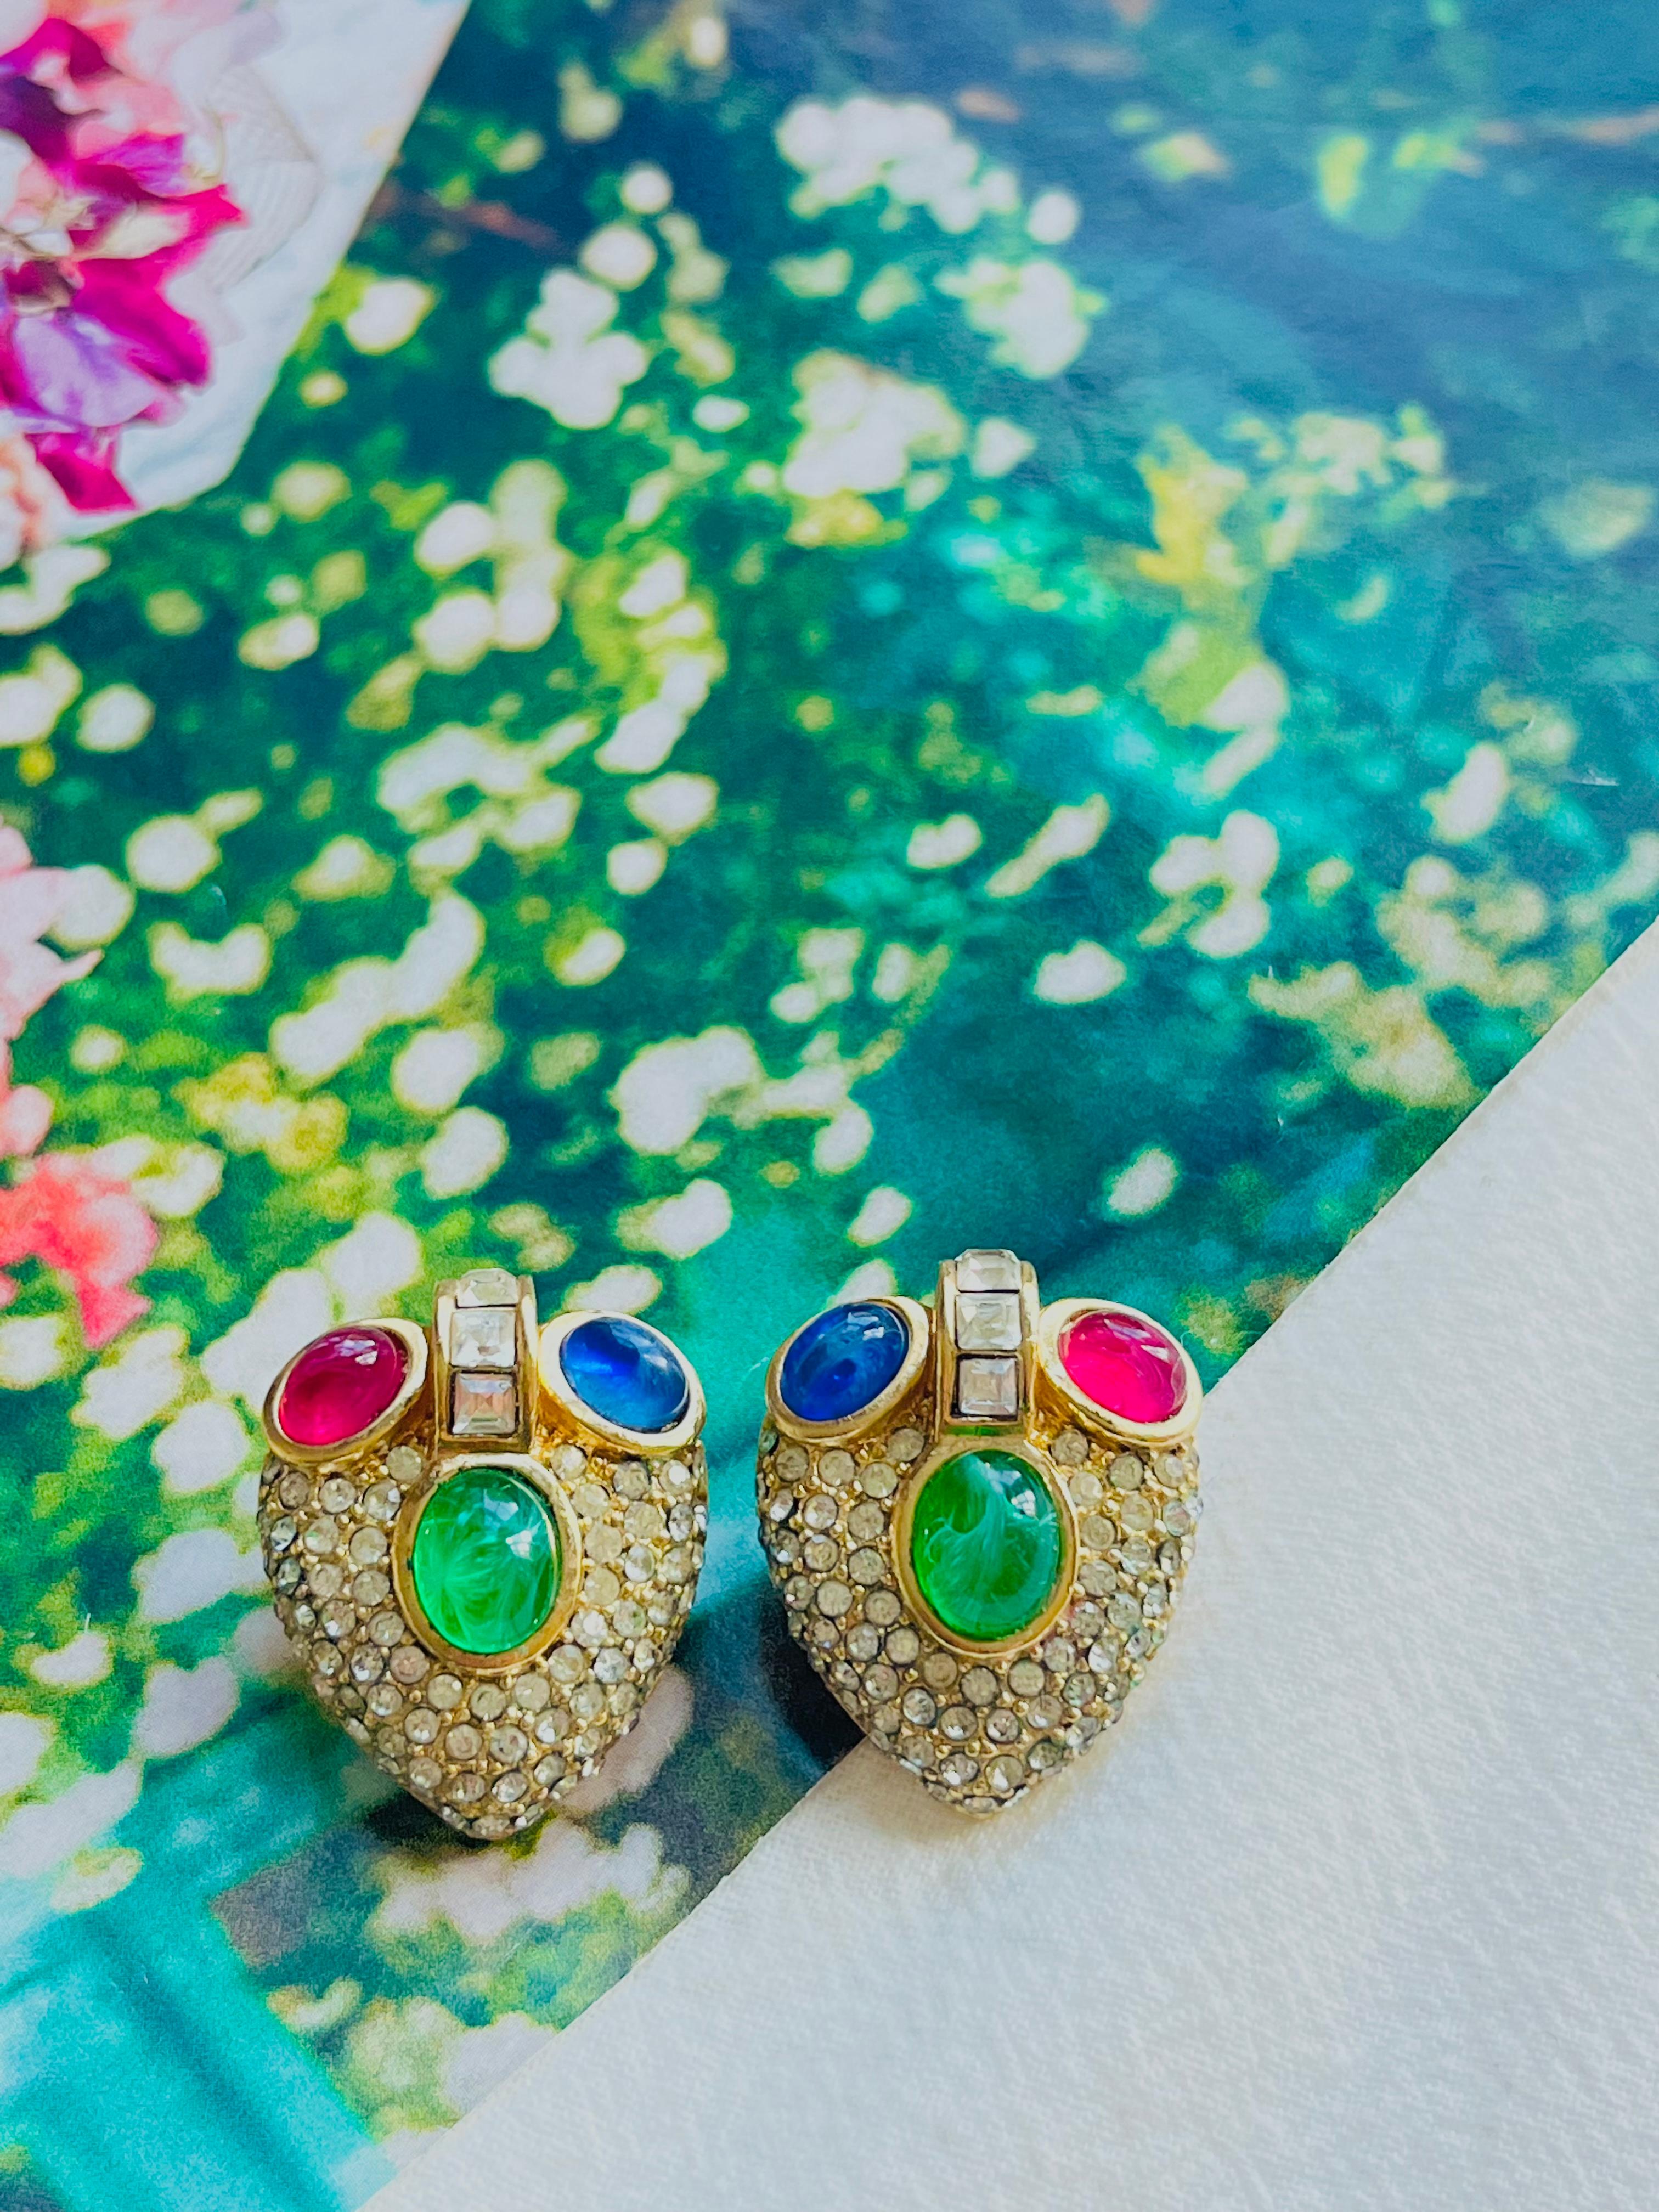 Christian Dior GROSSE 1960 Gripoix Sapphire Emerald Ruby Heart Whole Shining Crystals Exquisite Clip Earrings, Gold Tone

Very good condition. Light scratches or colour loss, barely noticeable. 100% Genuine.

A unique piece. Signed GROSSE at the